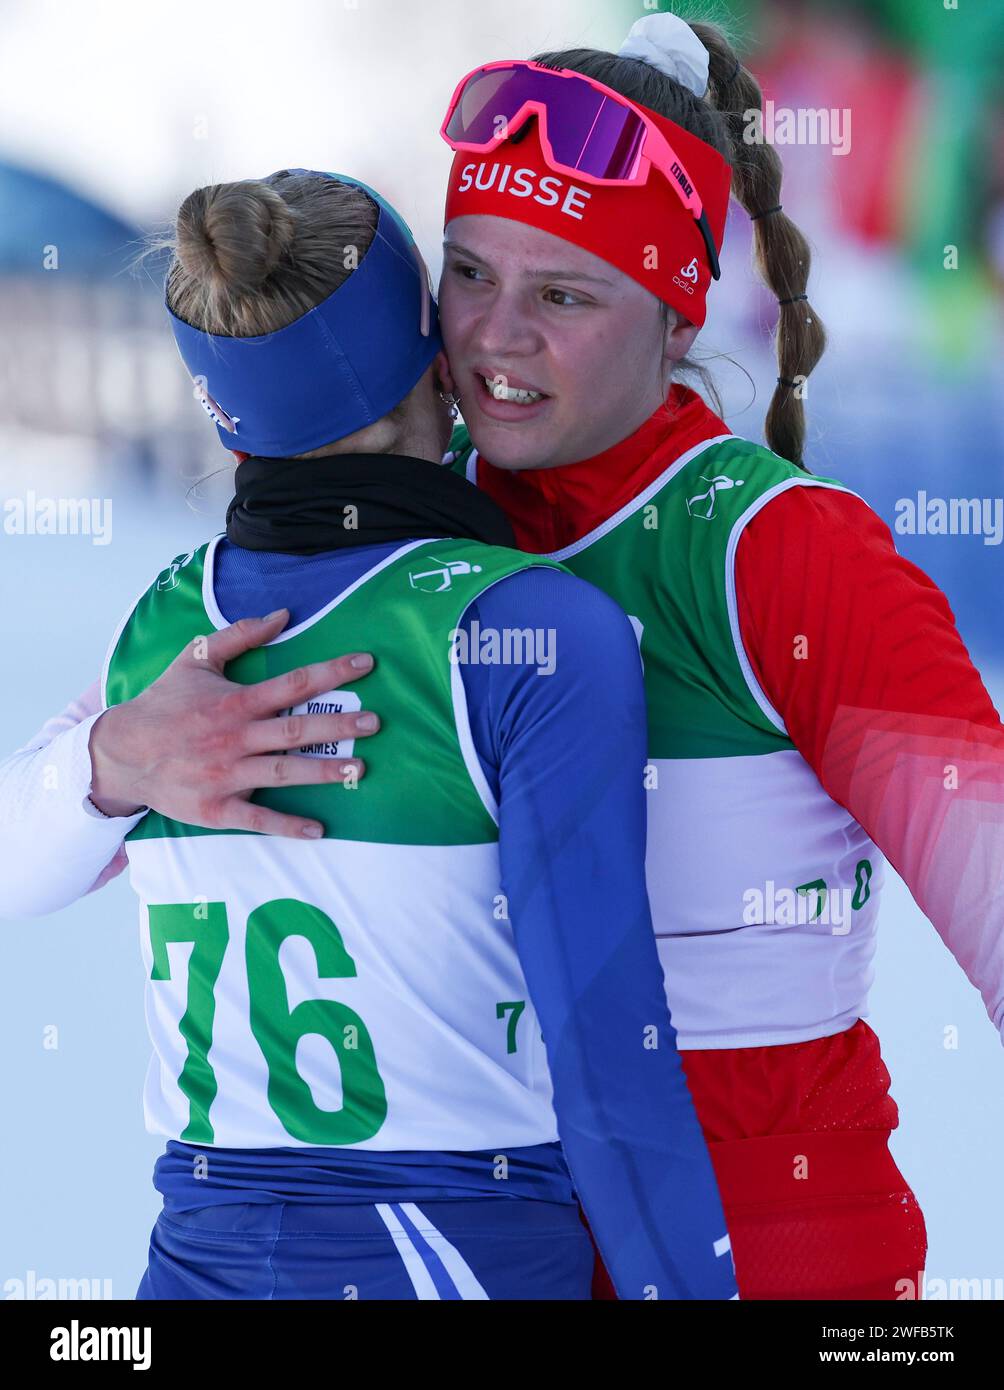 Pyeongchang, South Korea. 30th Jan, 2024. Ilaria Gruber (R) of Switzerland hugs Nelli-Lotta Karppelin of Finland after the Women's 7.5km Classic of Cross-Country Skiing event at the Gangwon 2024 Winter Youth Olympic Games in Pyeongchang, South Korea, Jan. 30, 2024. Credit: Hu Huhu/Xinhua/Alamy Live News Stock Photo